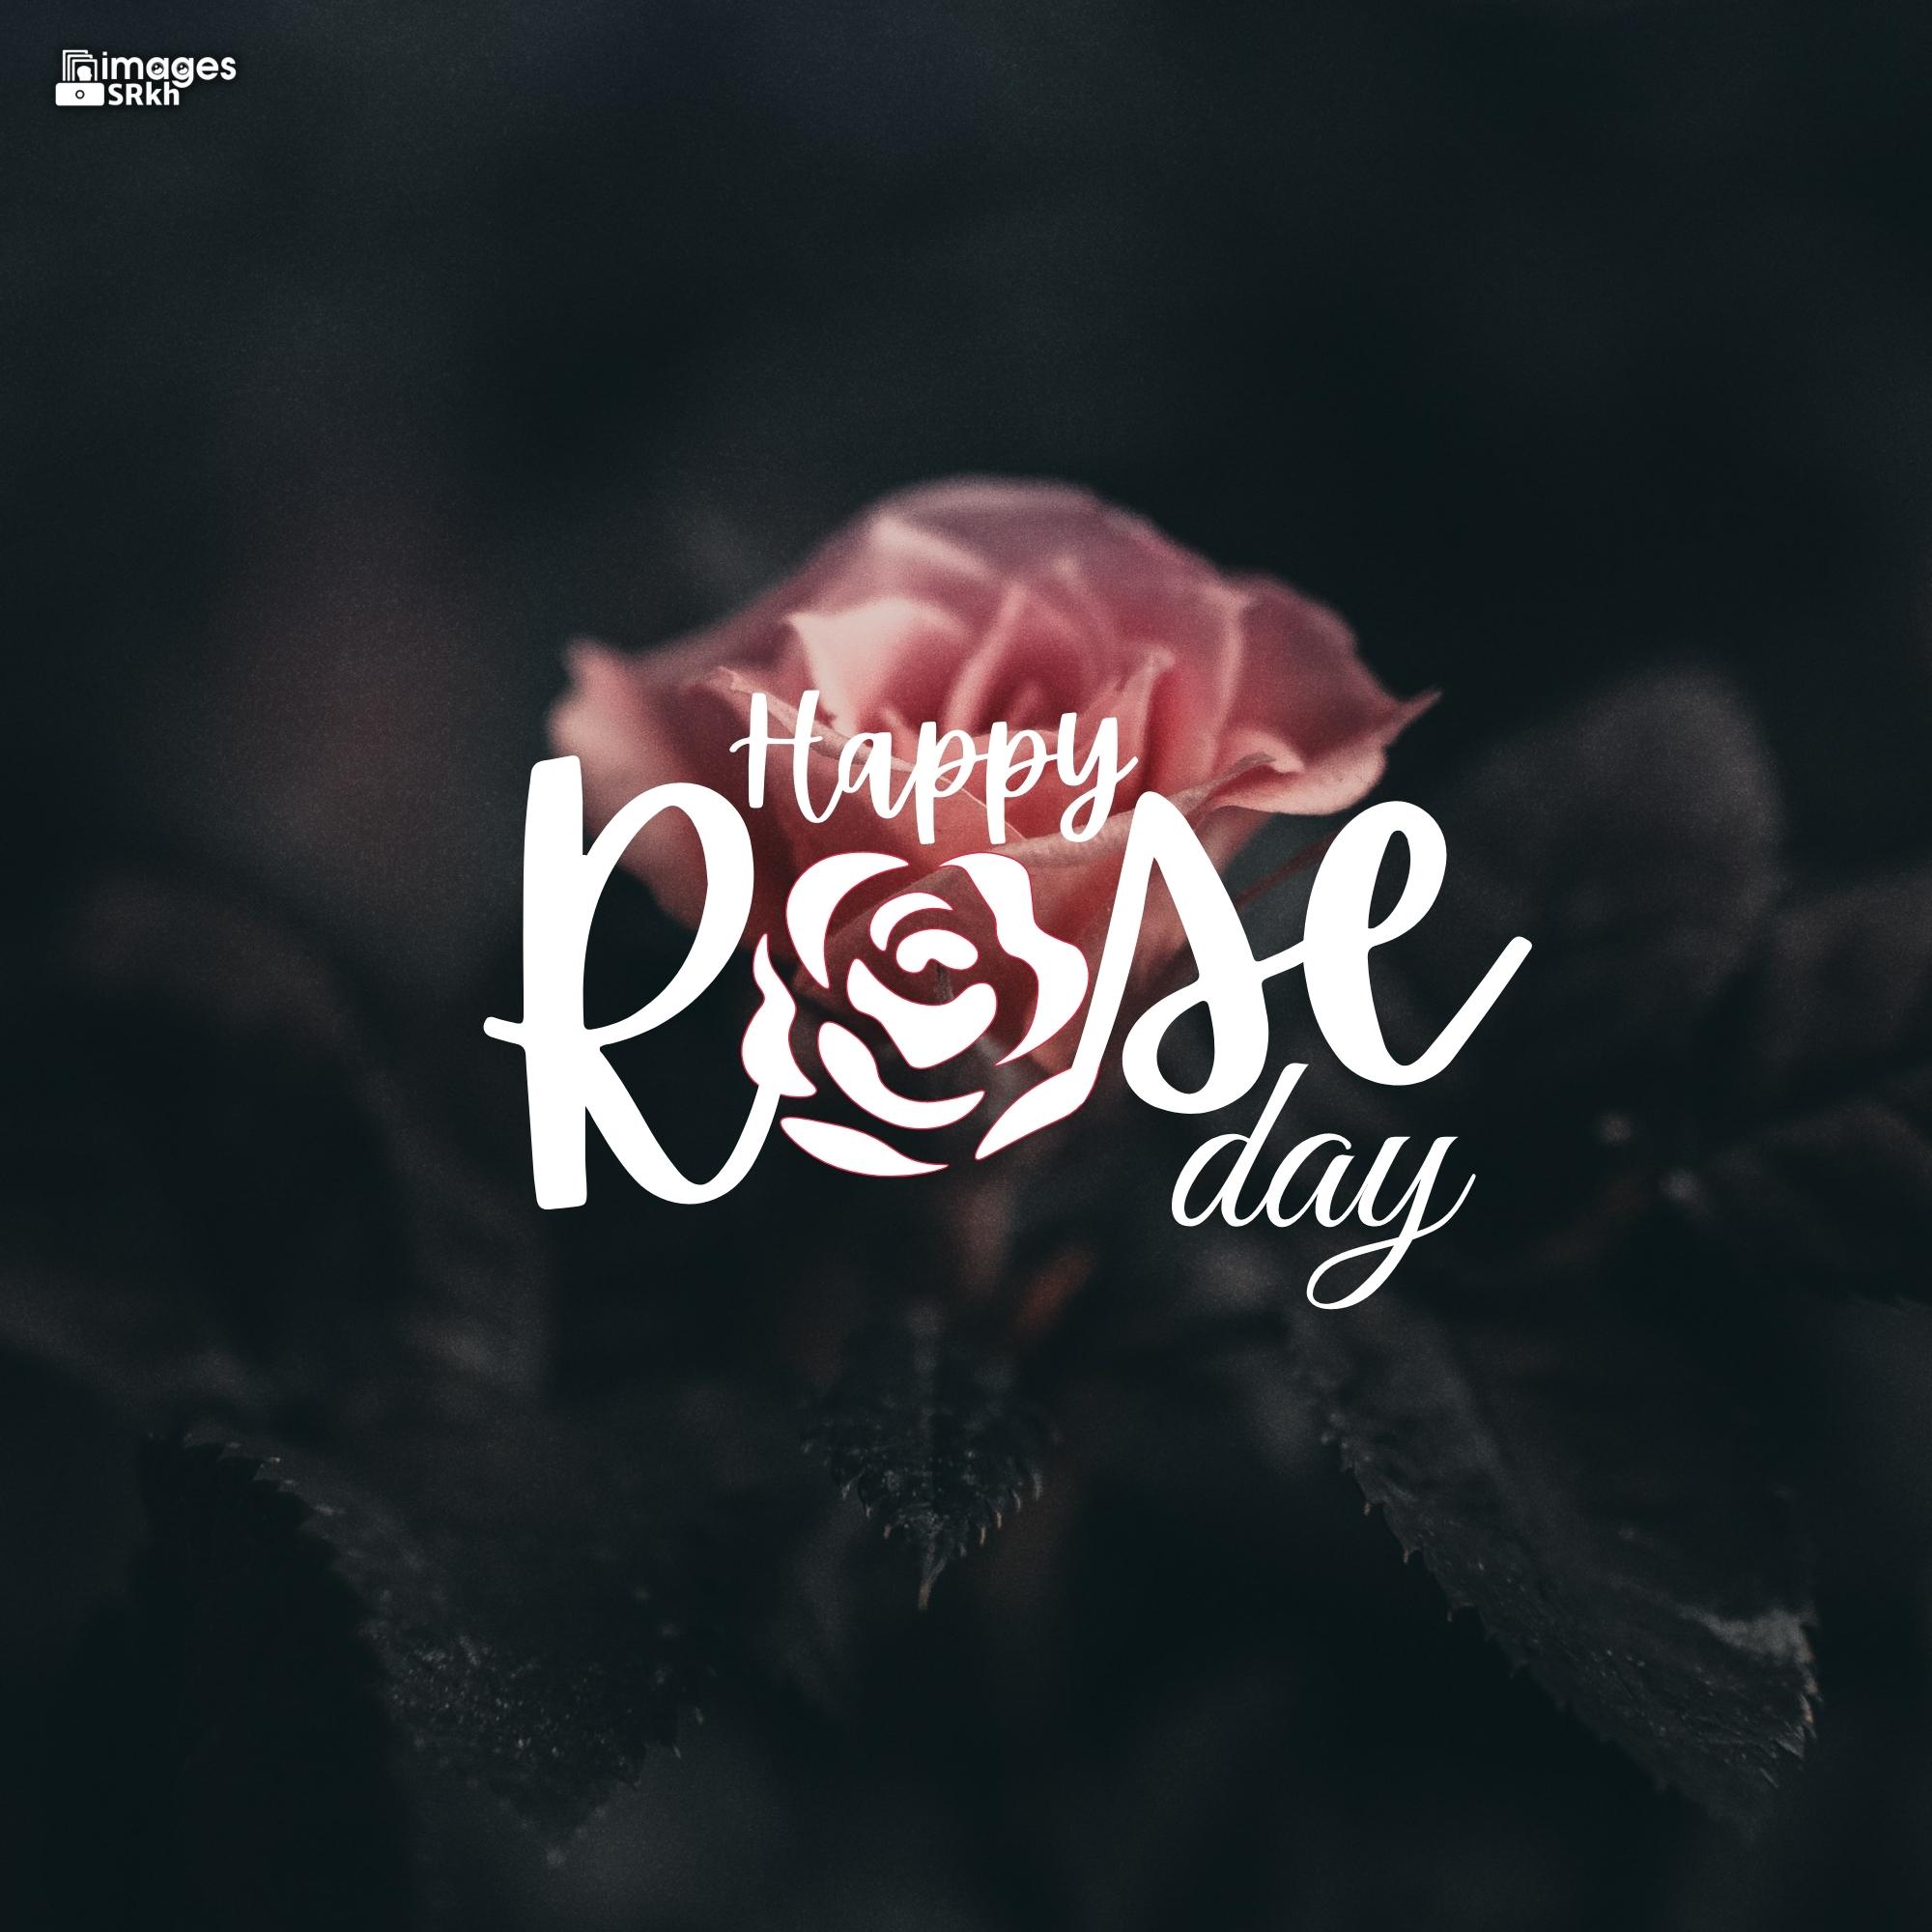 Happy Rose Day Image Hd Download (37)